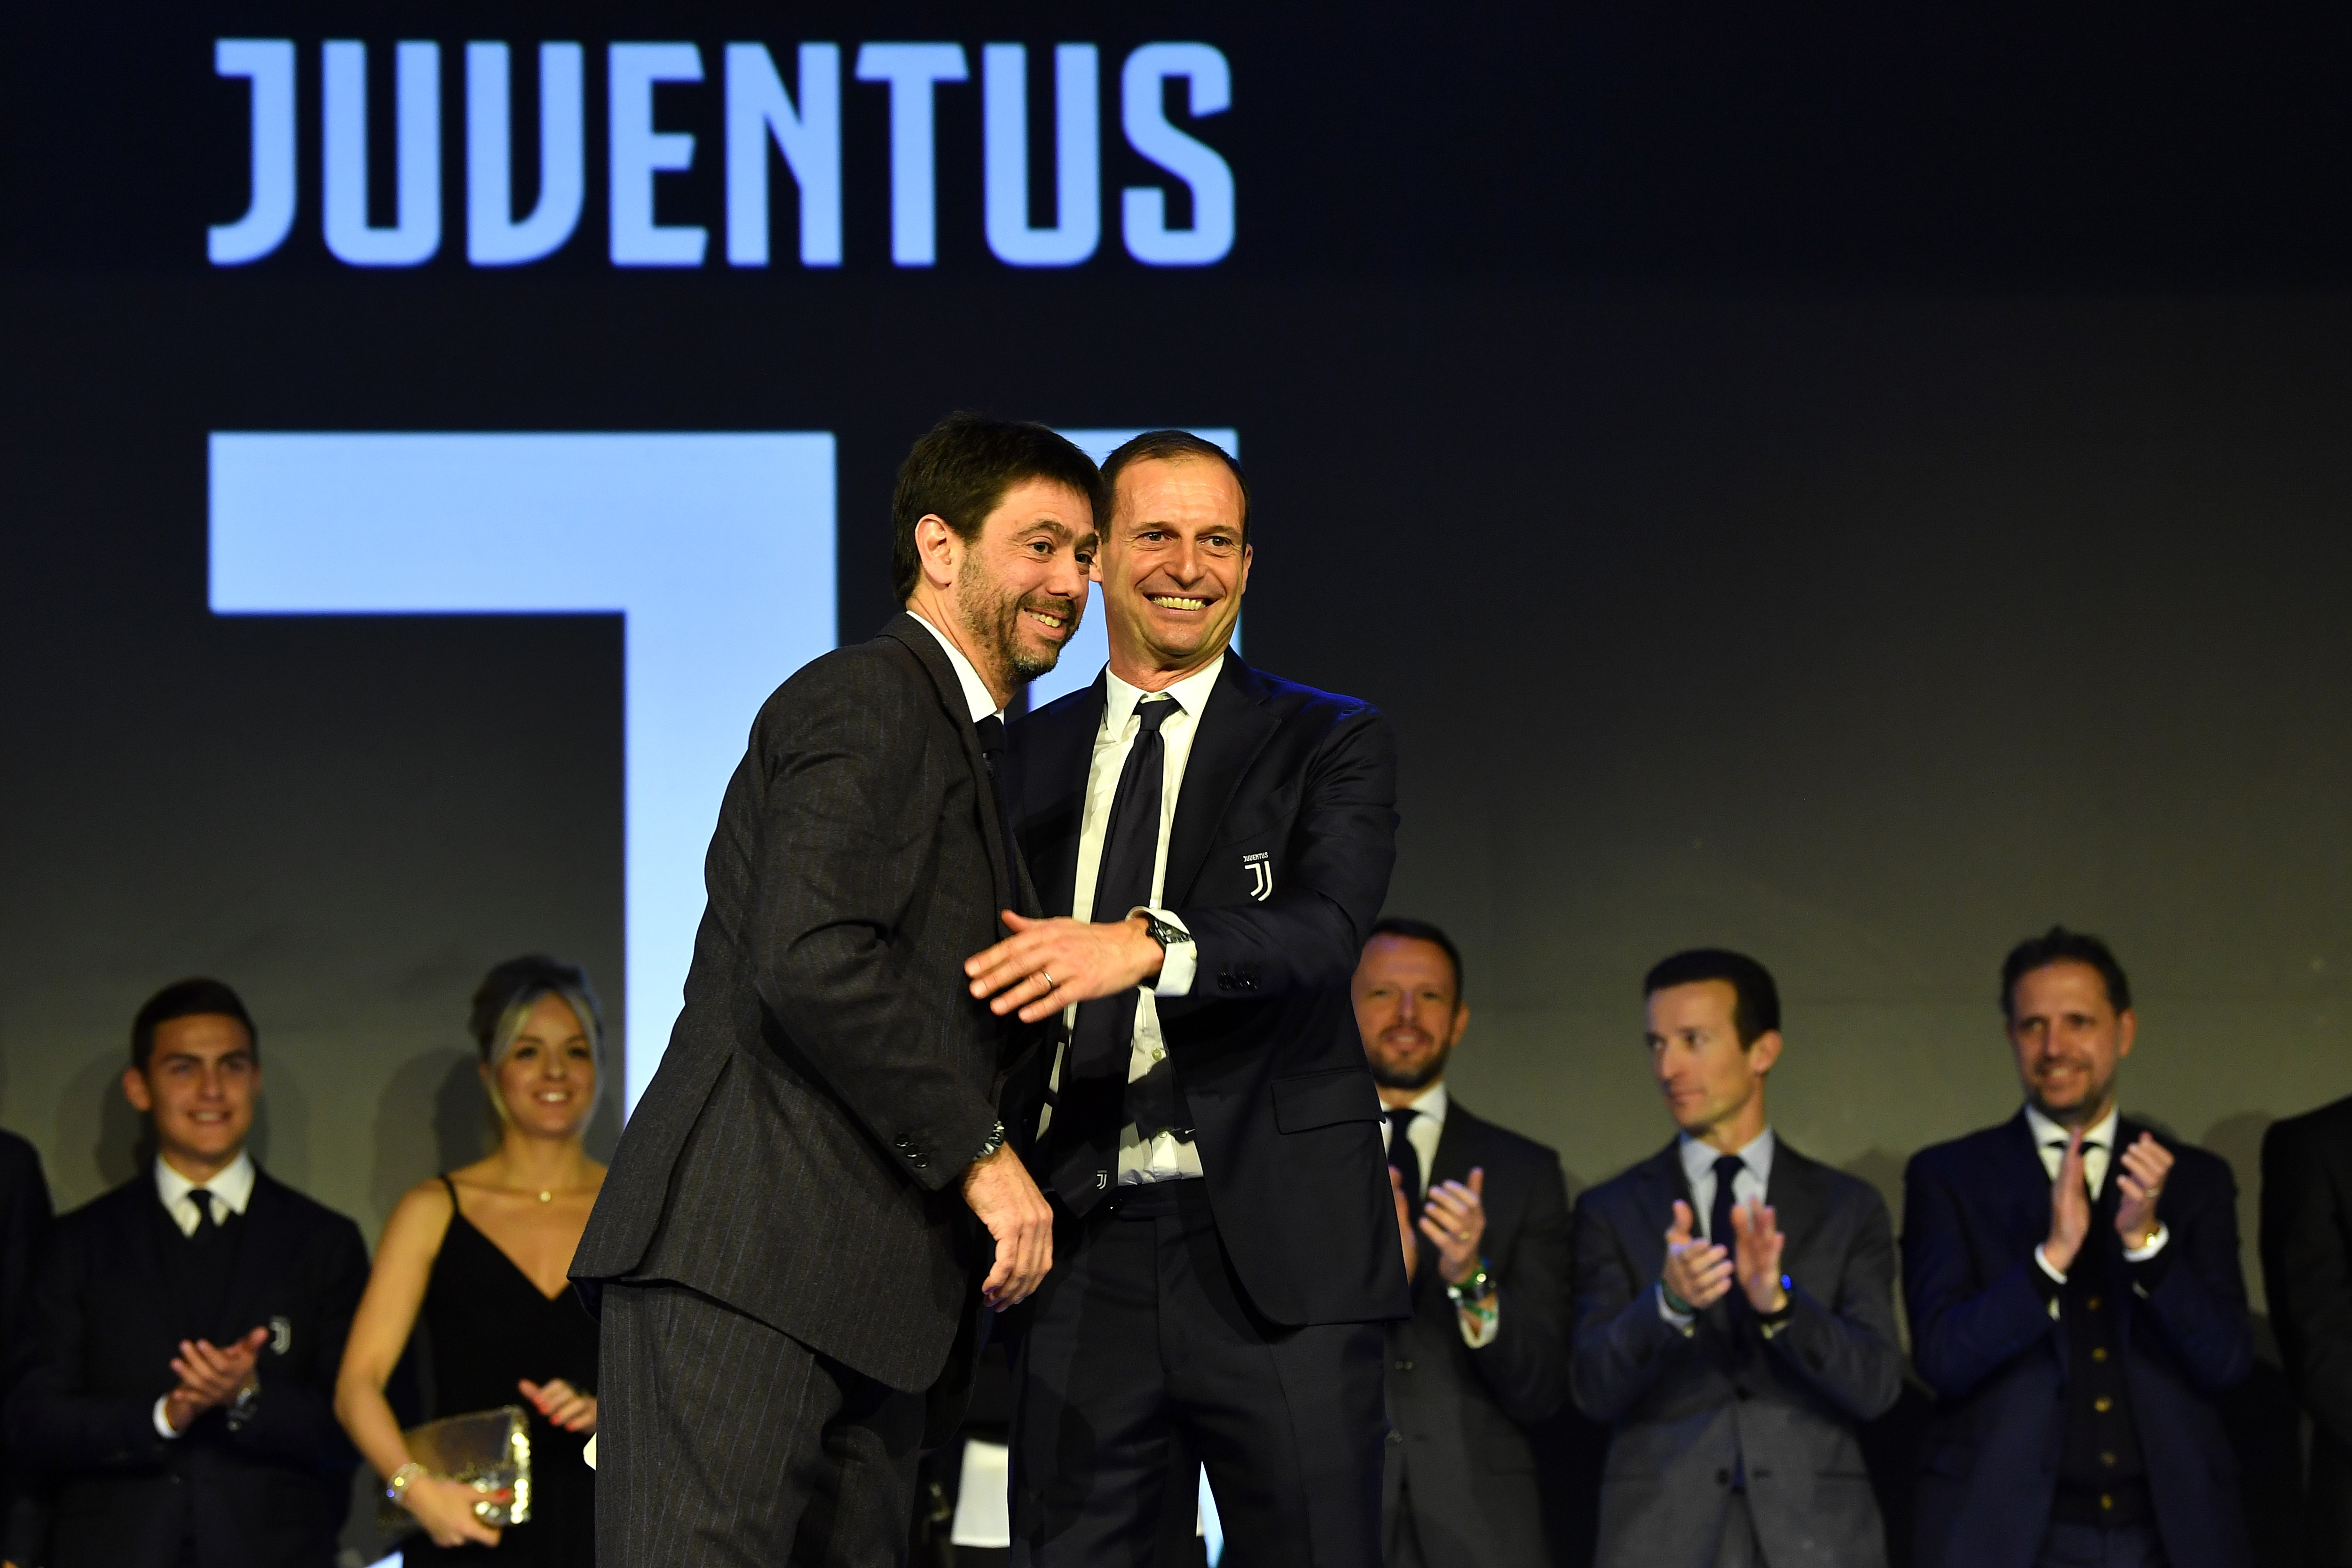 TURIN, ITALY - DECEMBER 20:  Juventus president Andrea Agnelli and head coach Massimiliano Allegri smile during the Juventus Institutional Xmas Dinner on December 20, 2018 in Turin, Italy.  (Photo by Valerio Pennicino - Juventus FC/Juventus FC via Getty Images)